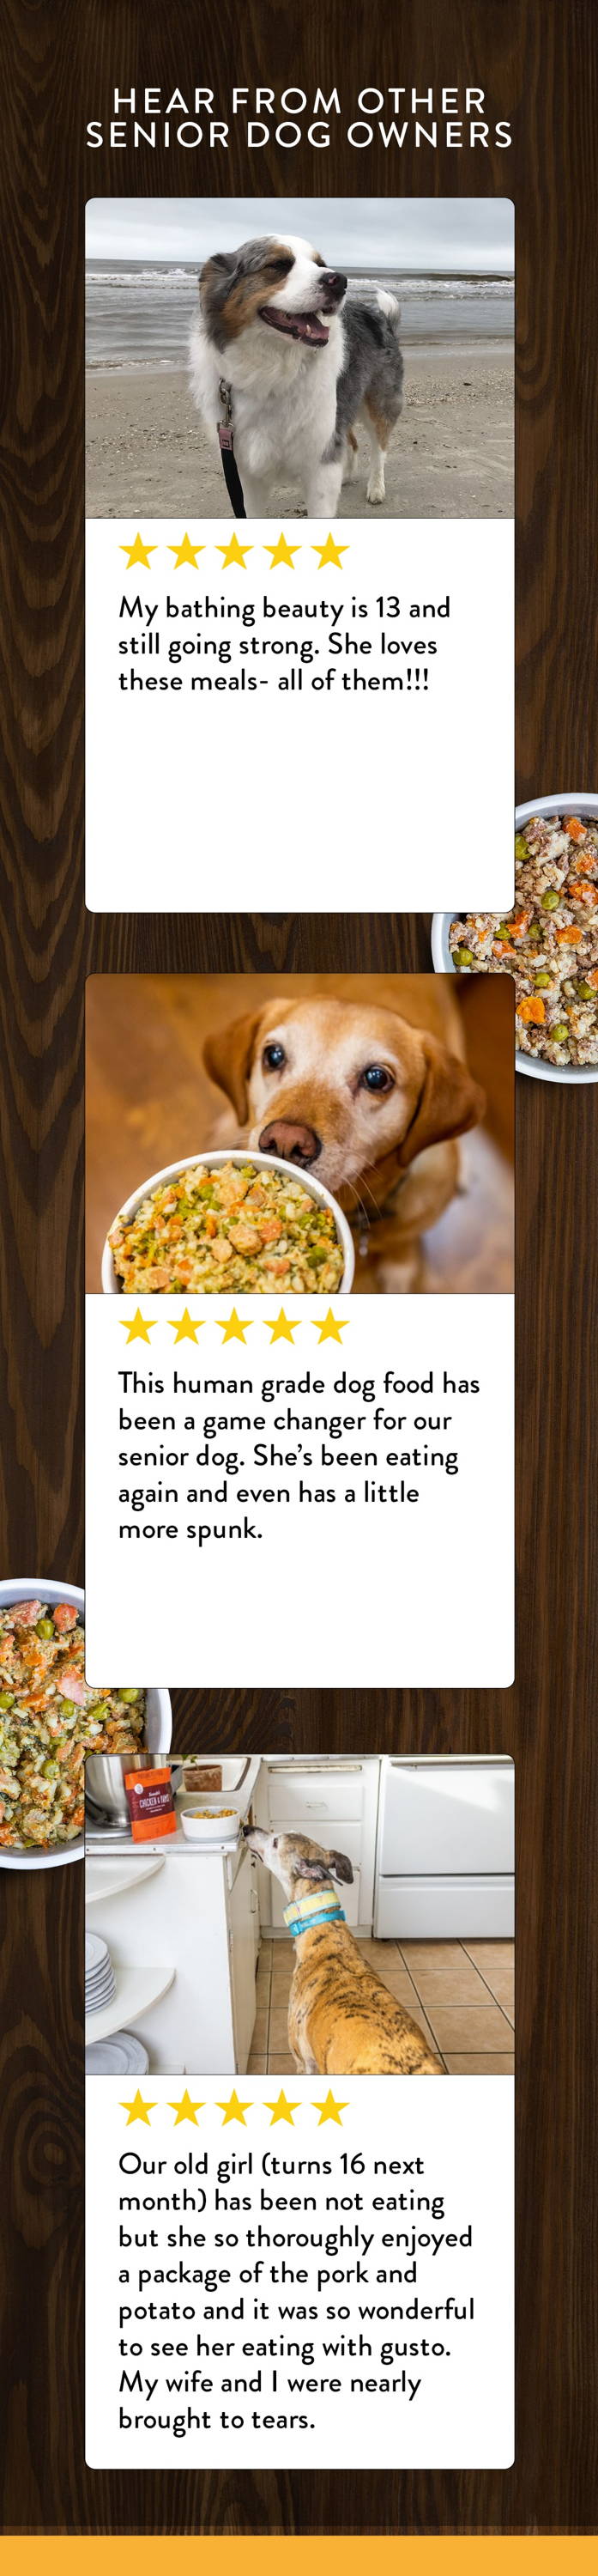 Testimonials from senior dog owners who love Portland Pet Food.